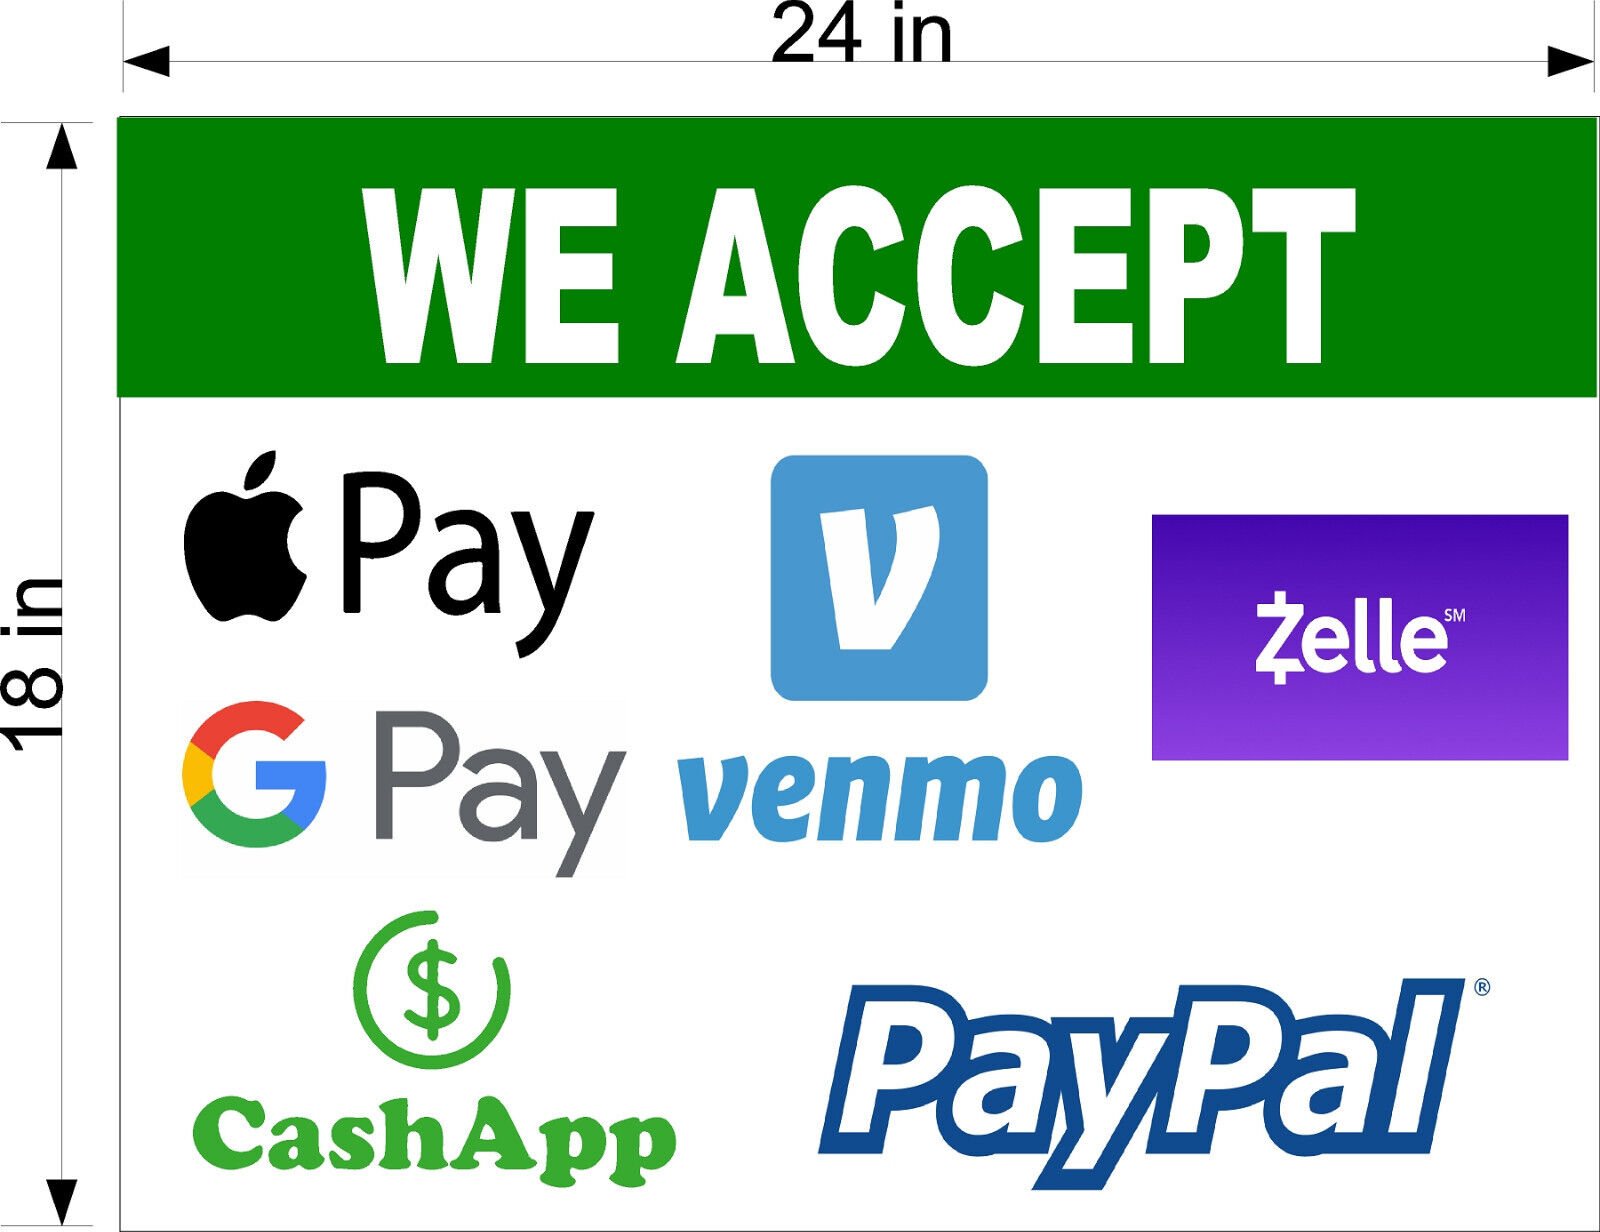 How to get paid with Cash App, Venmo, Zelle, or PayPal. | Bloom Help Center